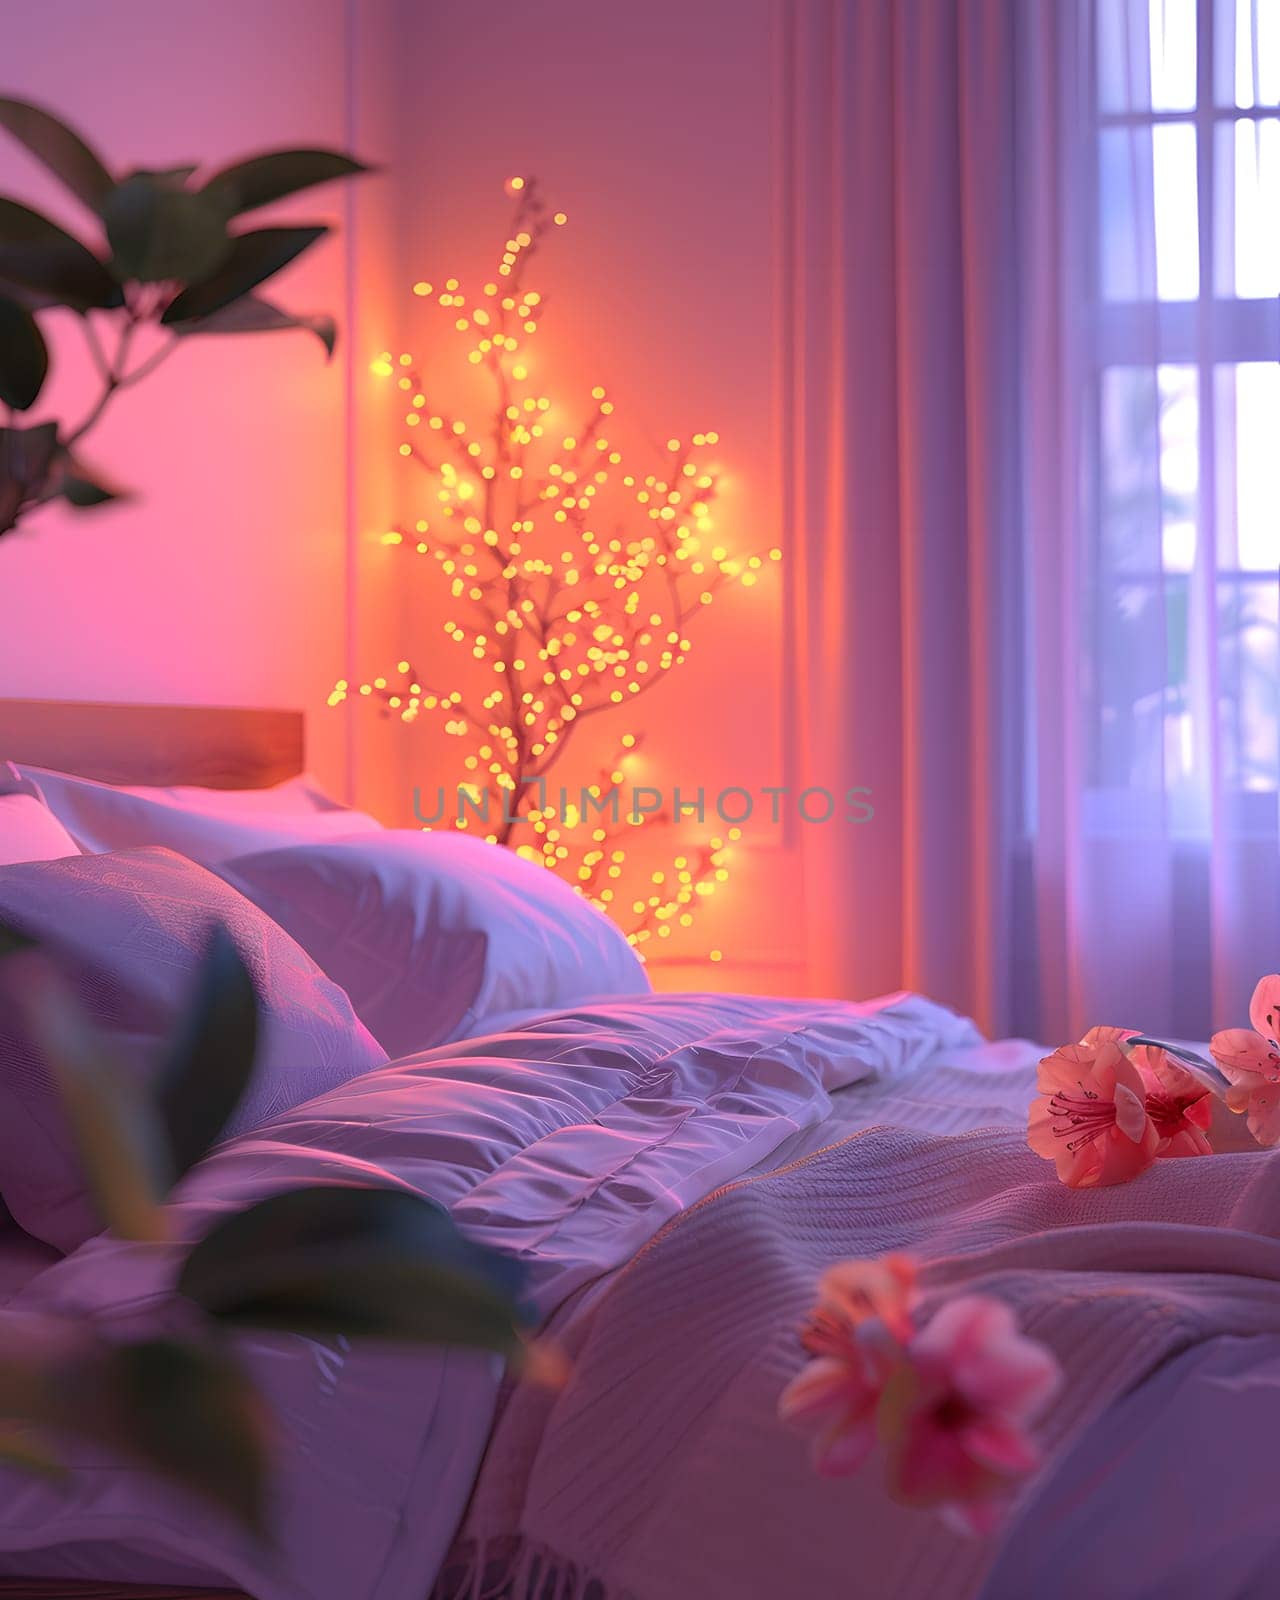 A bedroom with a purple plant, orange tree with lights, and sunlit window by Nadtochiy